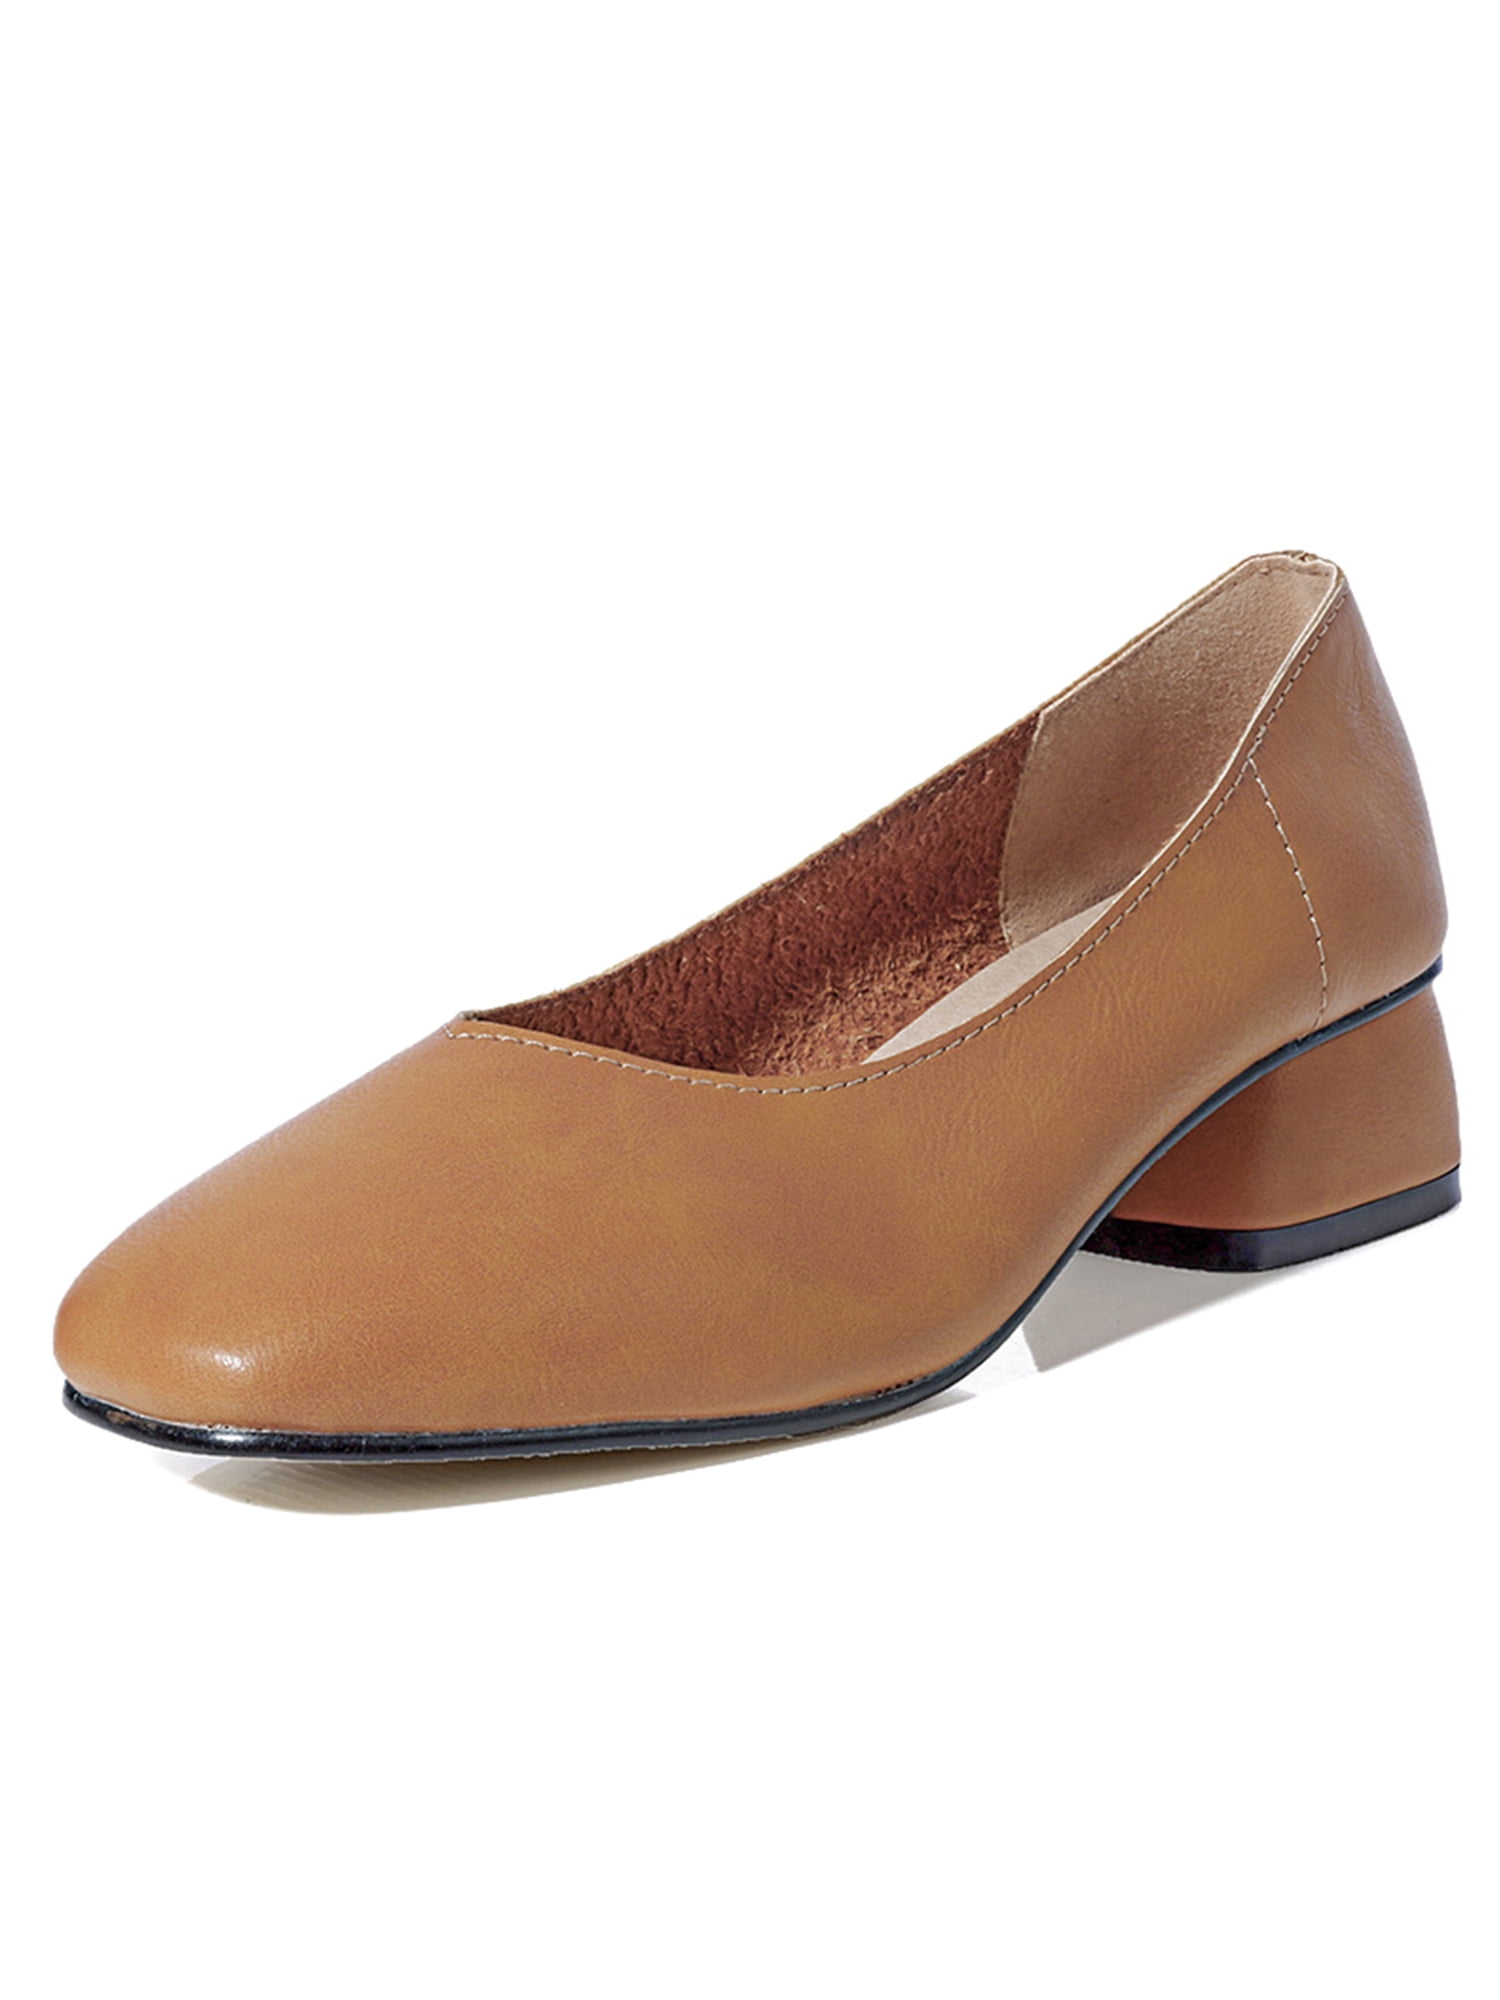 Red brown buckle strap low cut thick heel dress shoe | Womens heel dress  shoes online 2147WS